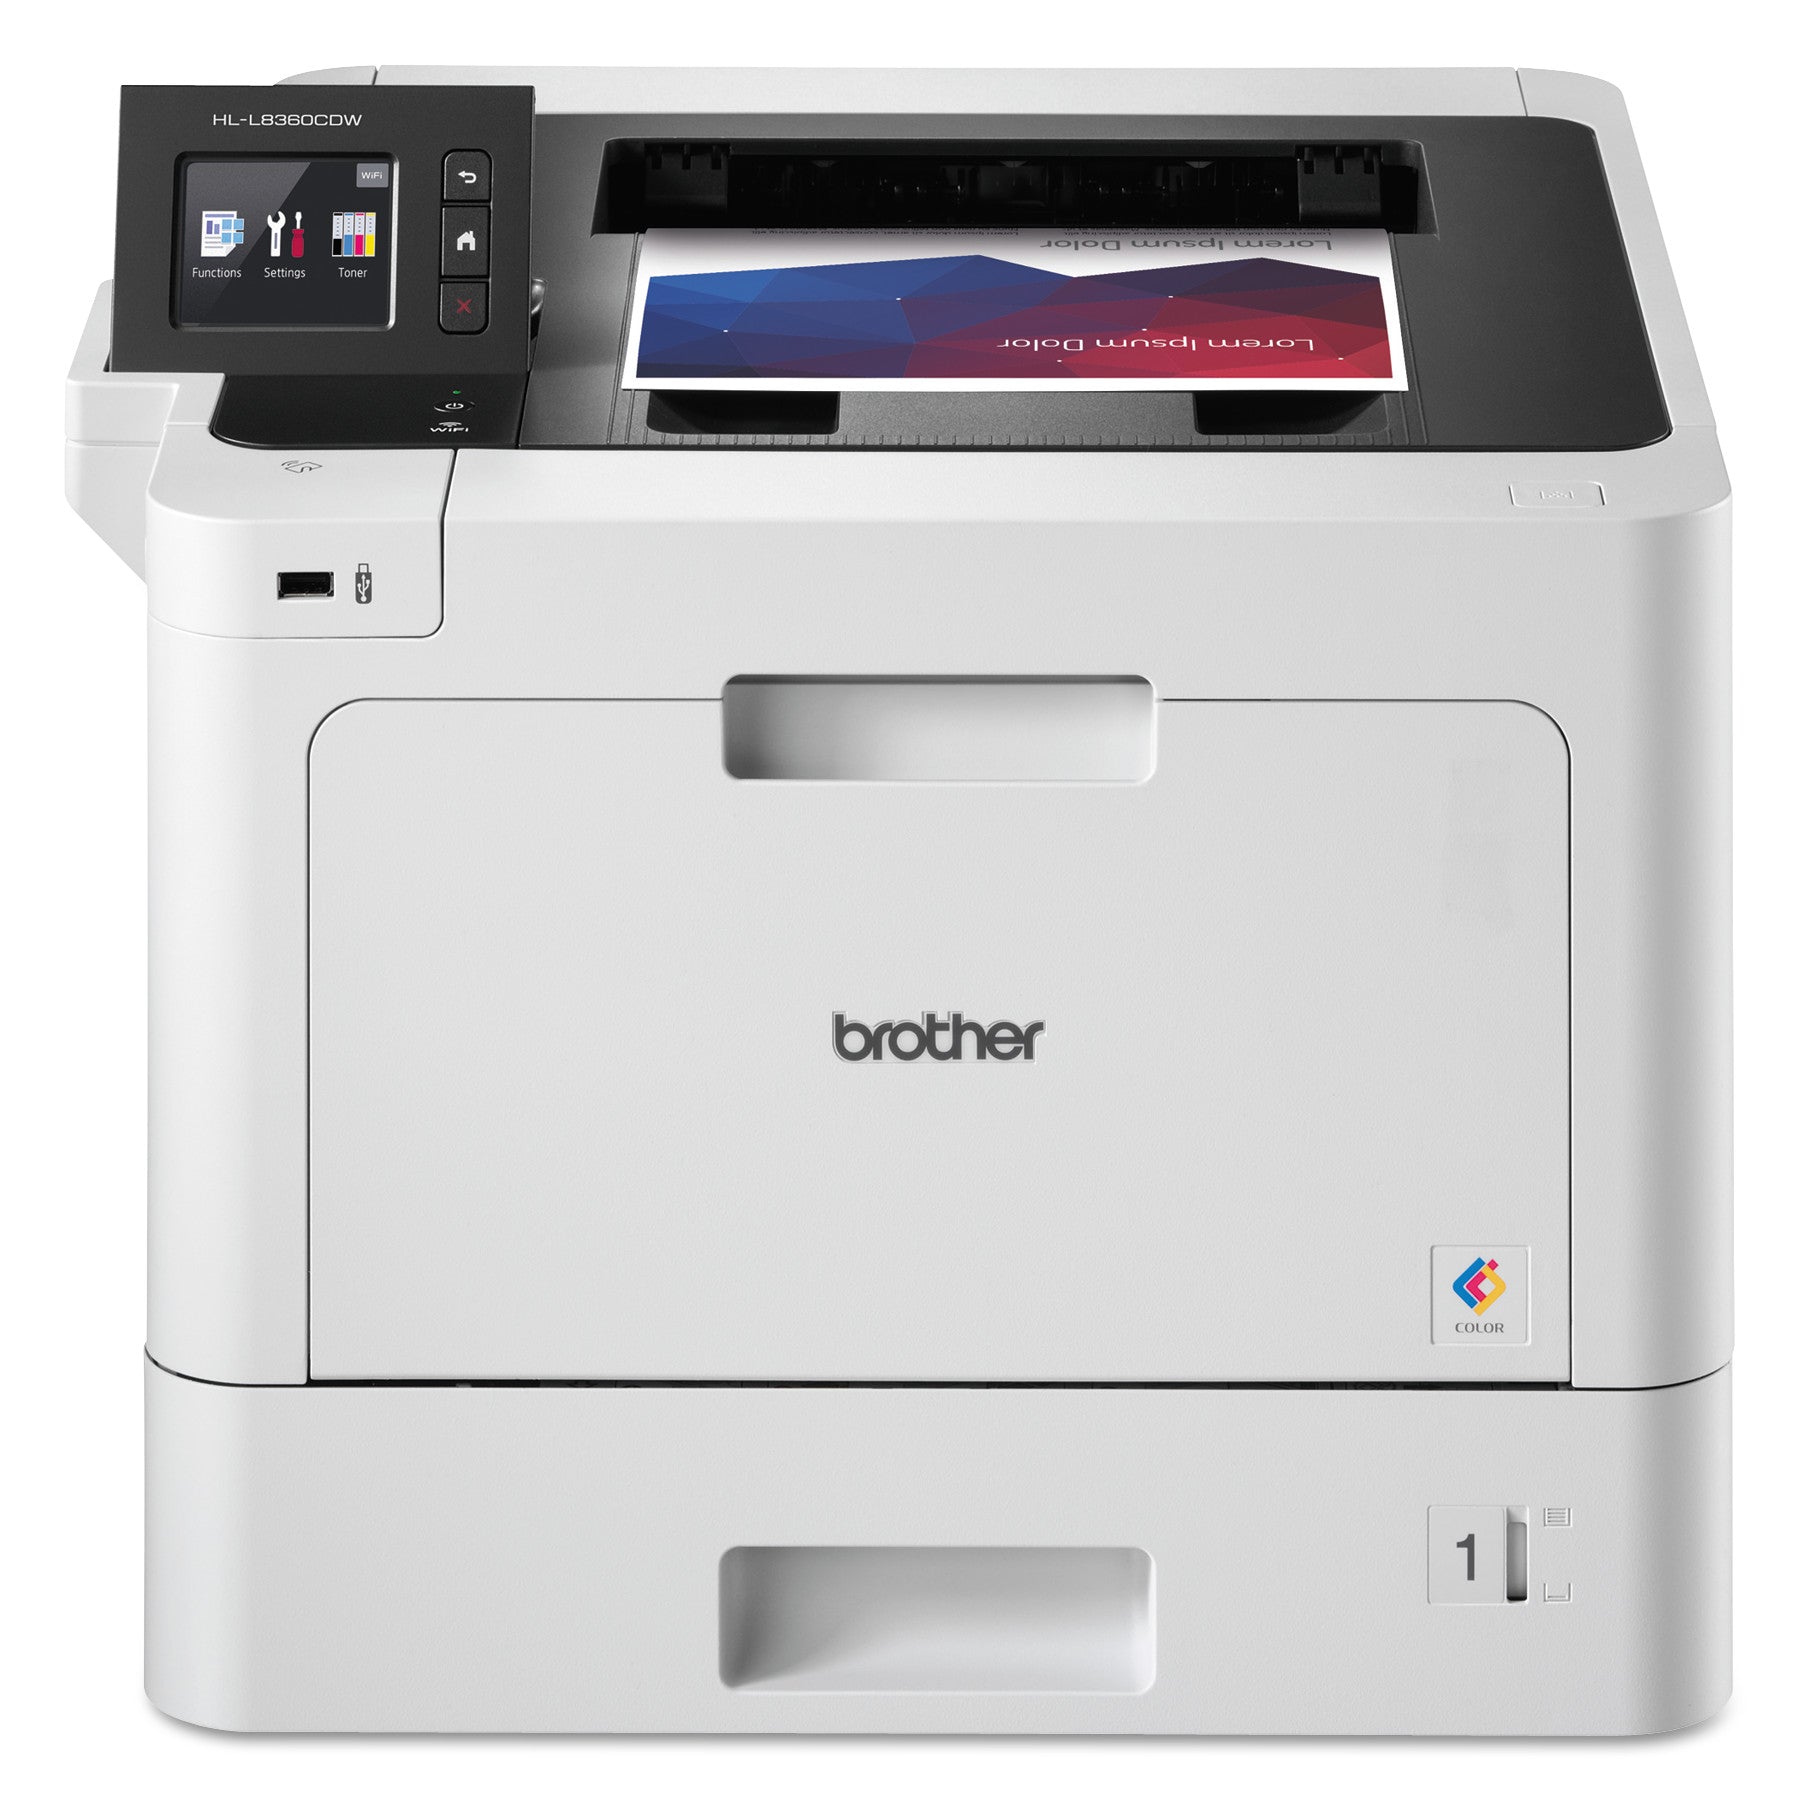 hll8360cdw-business-color-laser-printer-with-duplex-printing-and-wireless-networking_brthll8360cdw - 1